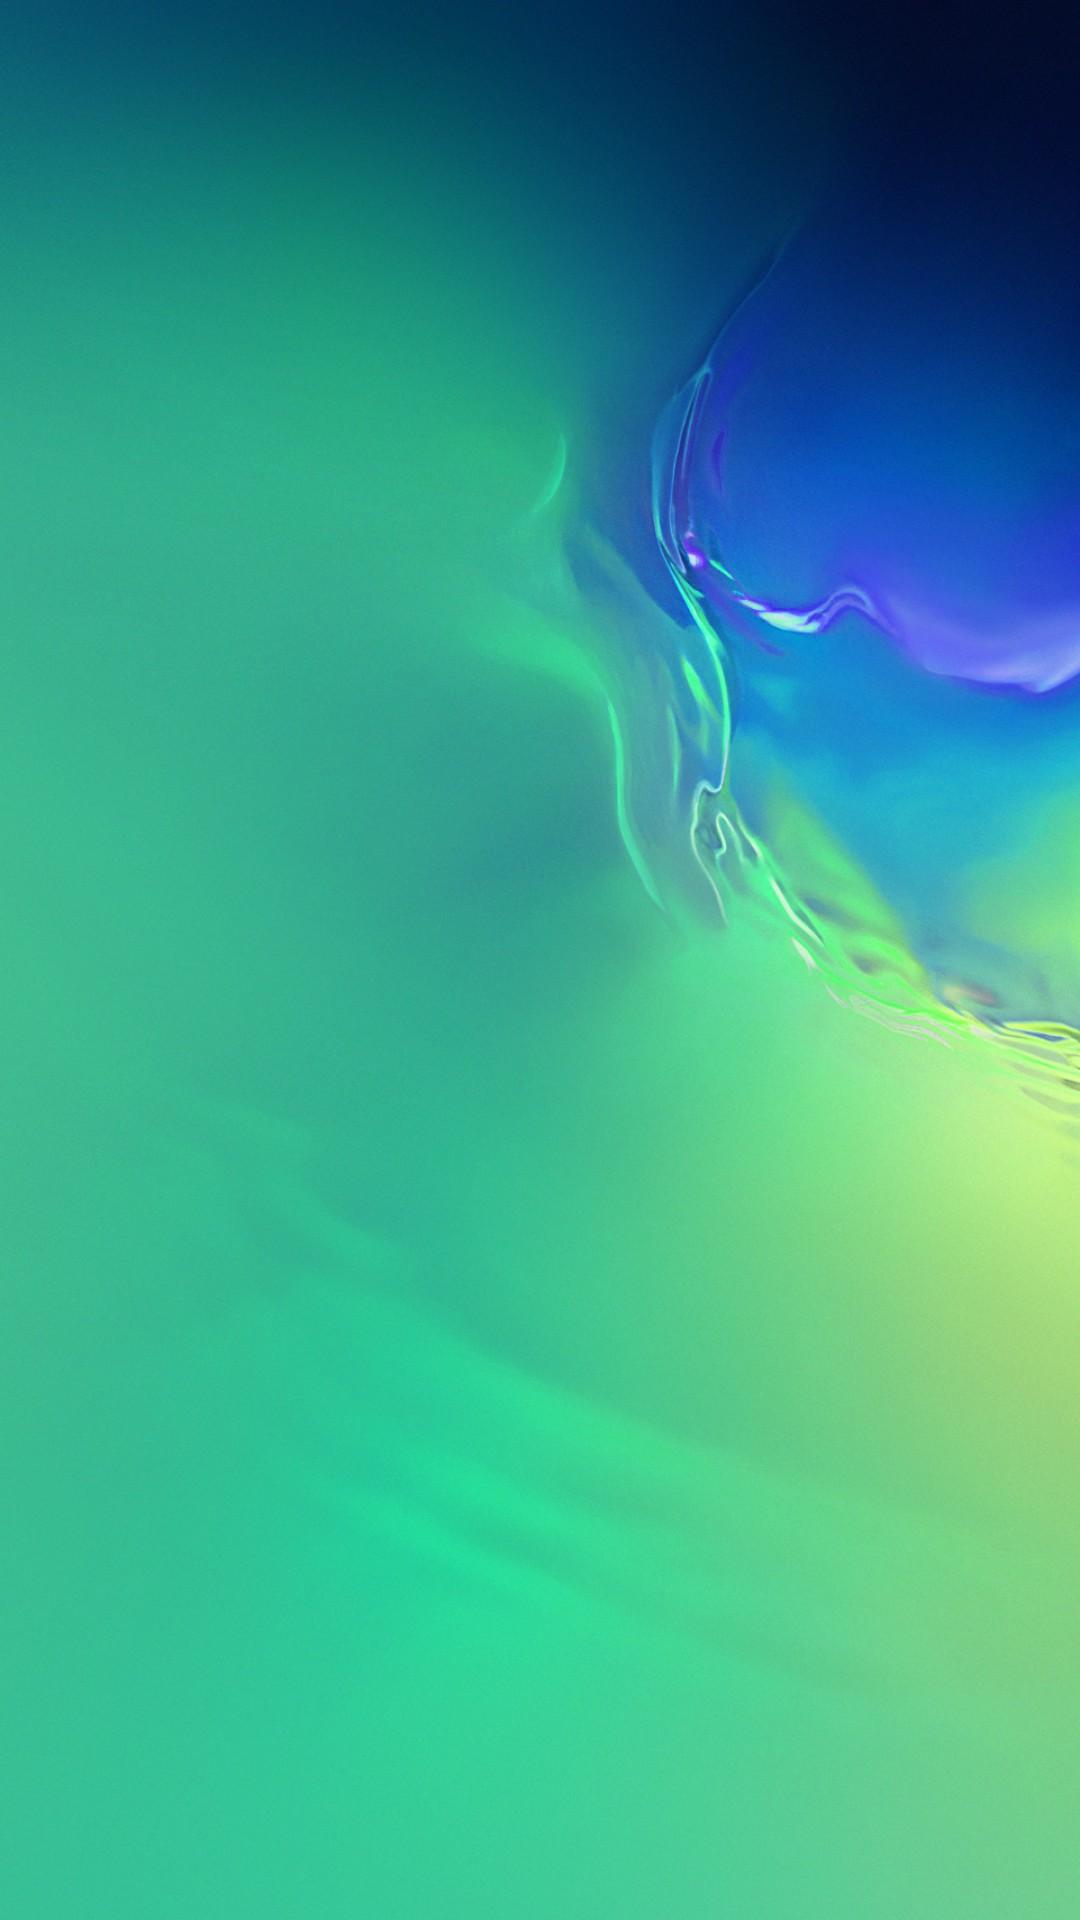 Get the Samsung Galaxy S10's New OneUI Wallpapers Here